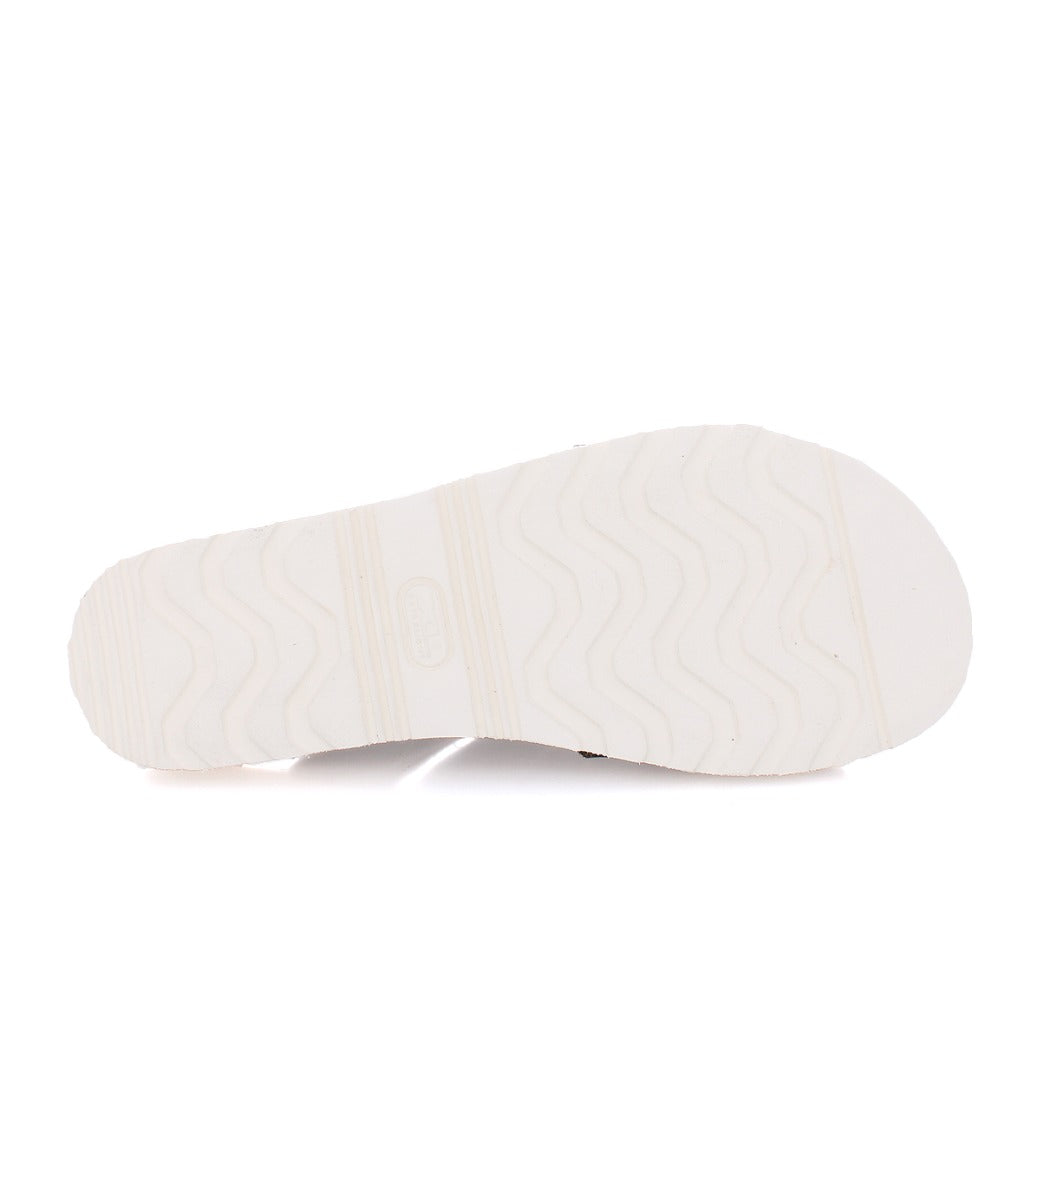 Bottom view of a Bed Stu Abraham Light slide sandal with a white rubber sole featuring wavy lines and a rectangular logo in the center.